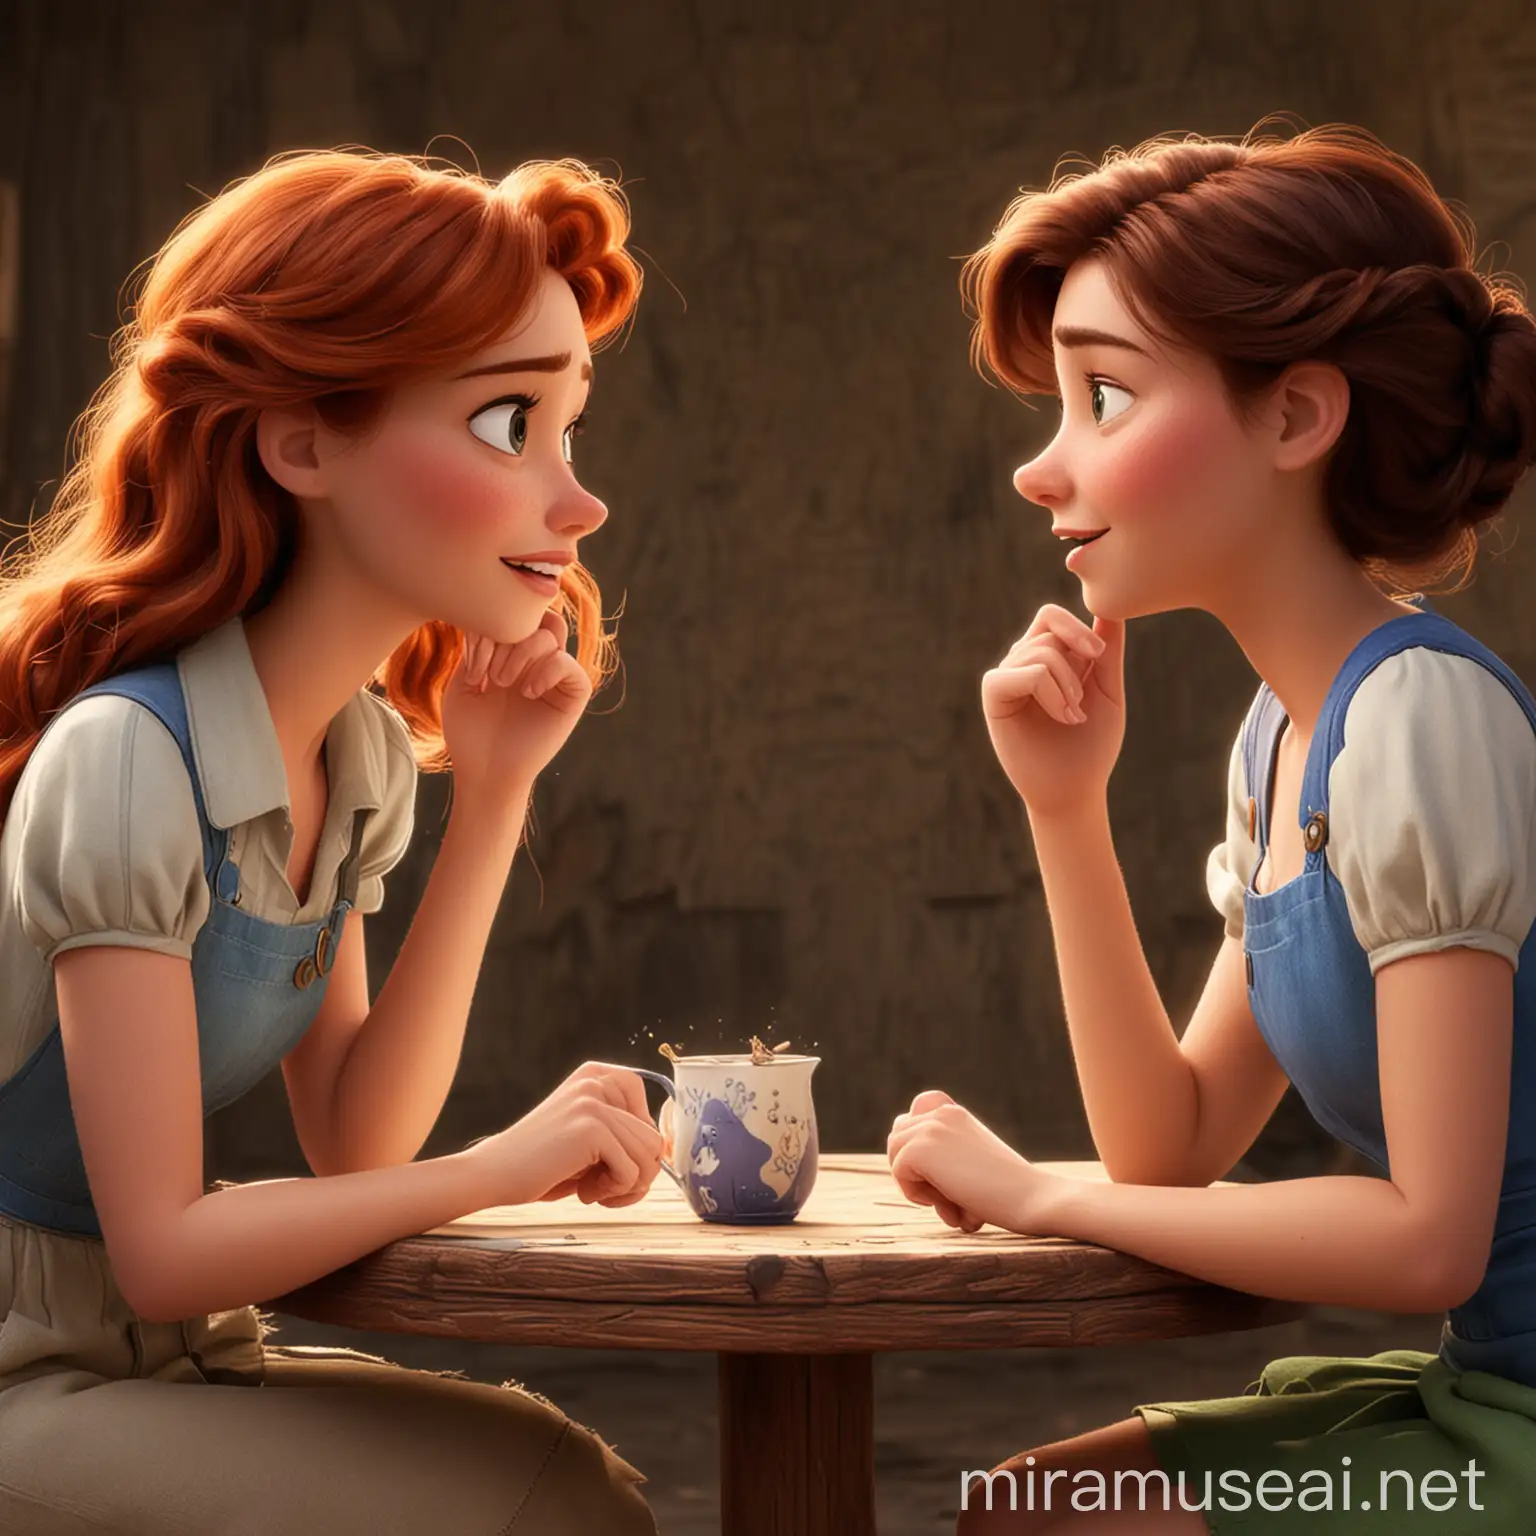 Two women are engaged in conversation，disney pixar style